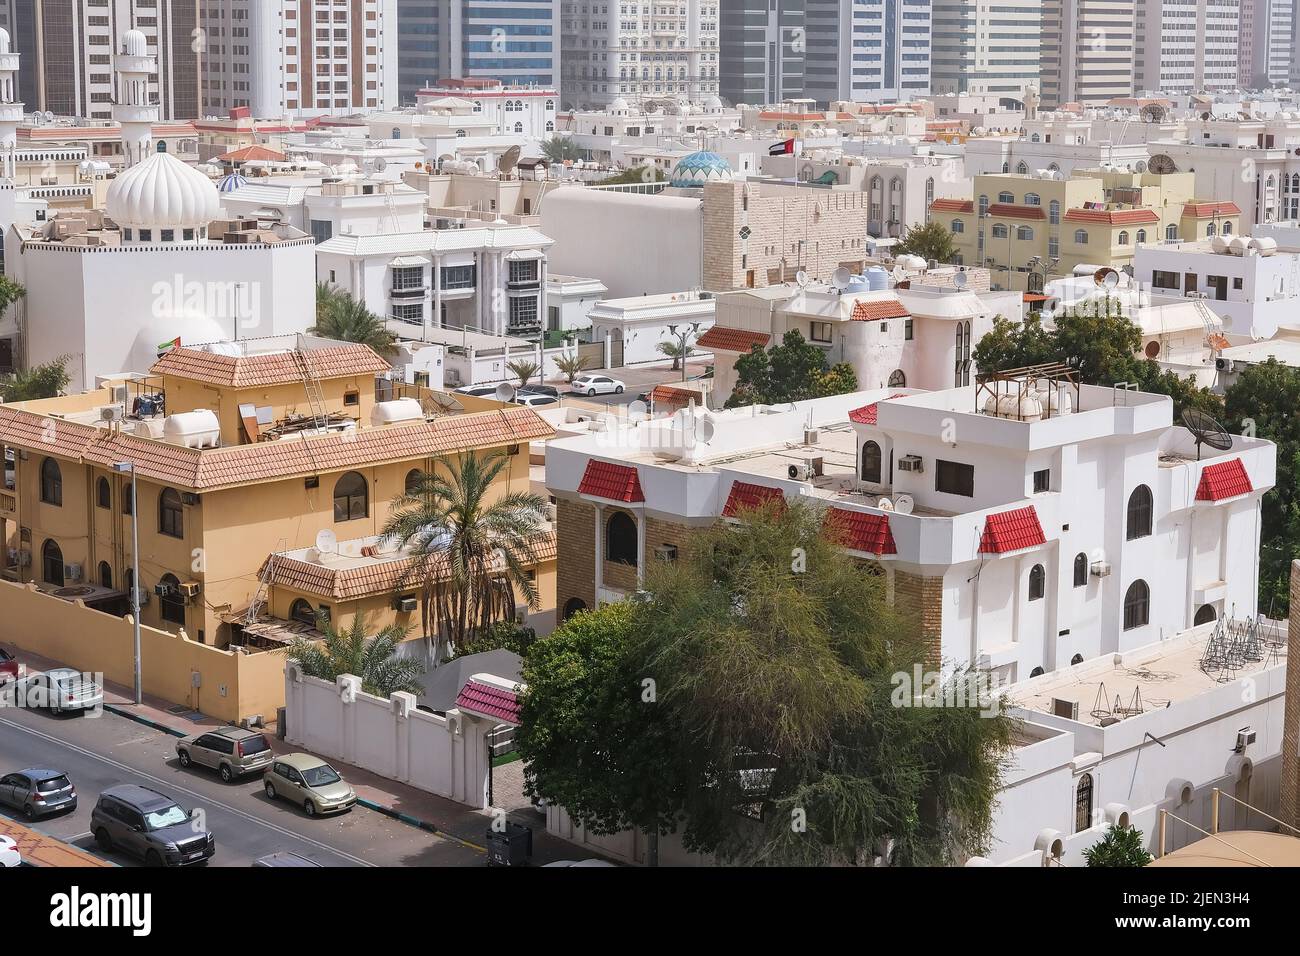 Villas residential area of Abu Dhabi with modern tower blocks in background. Modern middle eastern urban architecture. Stock Photo